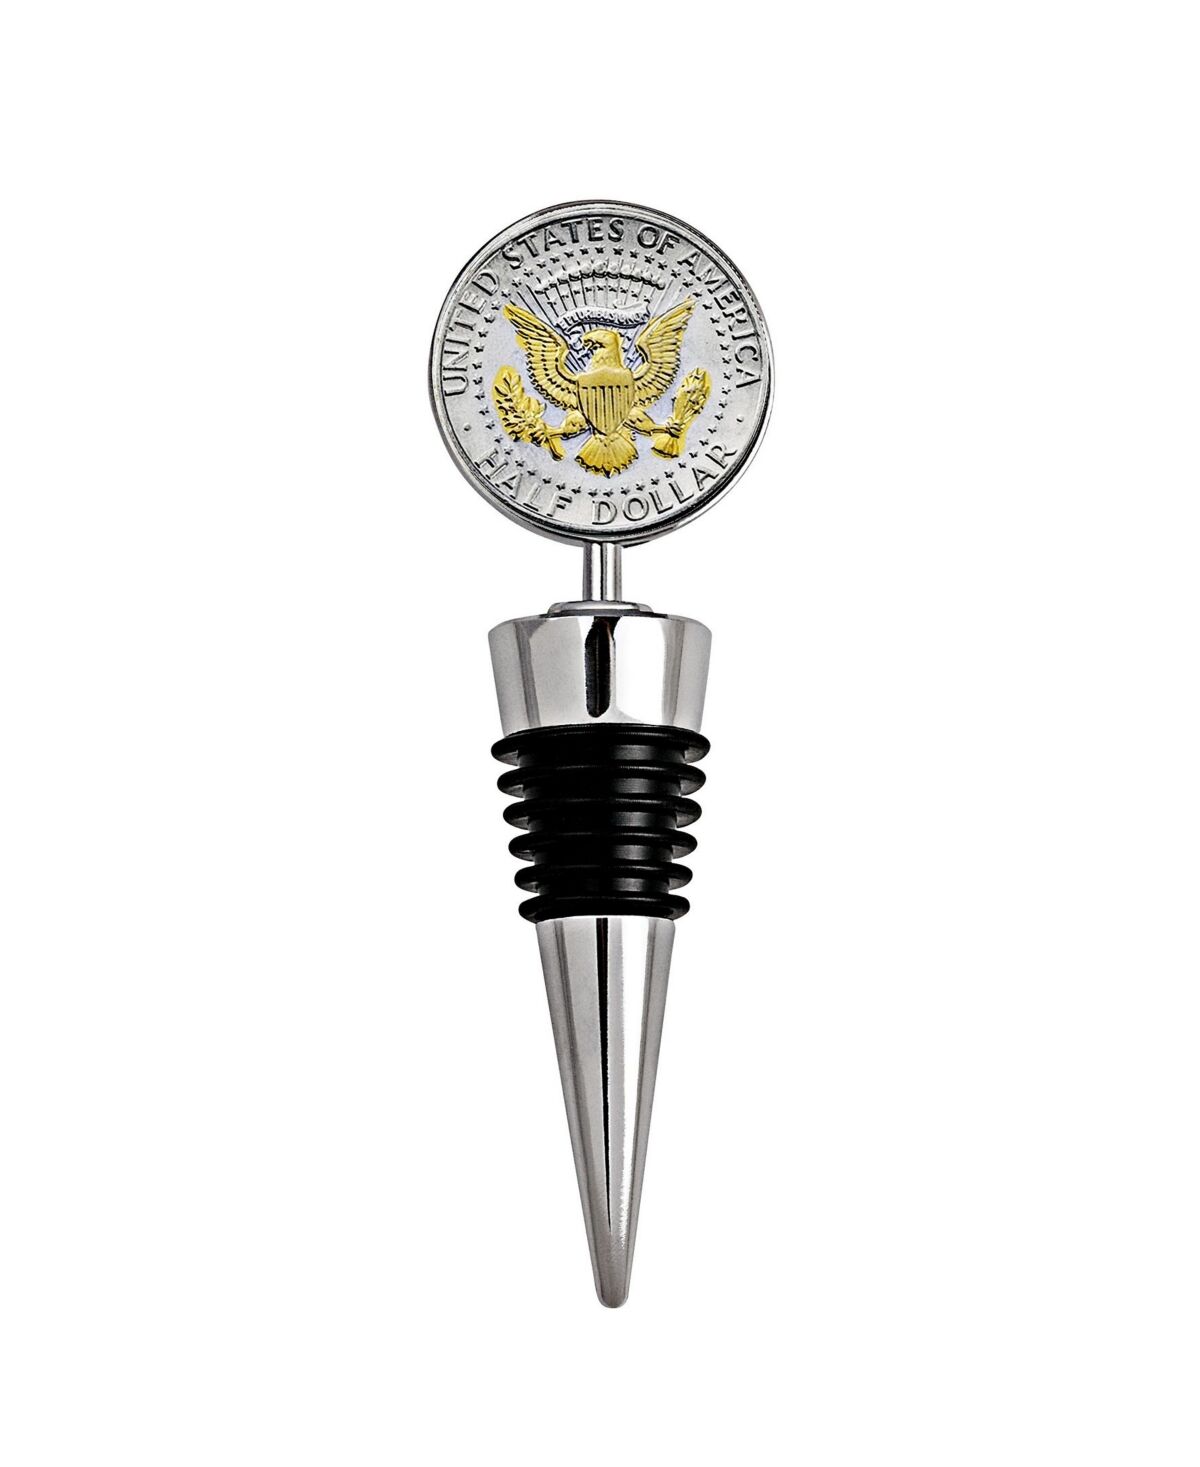 American Coin Treasures Selectively Gold-Layered Presidential Seal Jfk Half Dollar Coin Wine Stopper - Multi